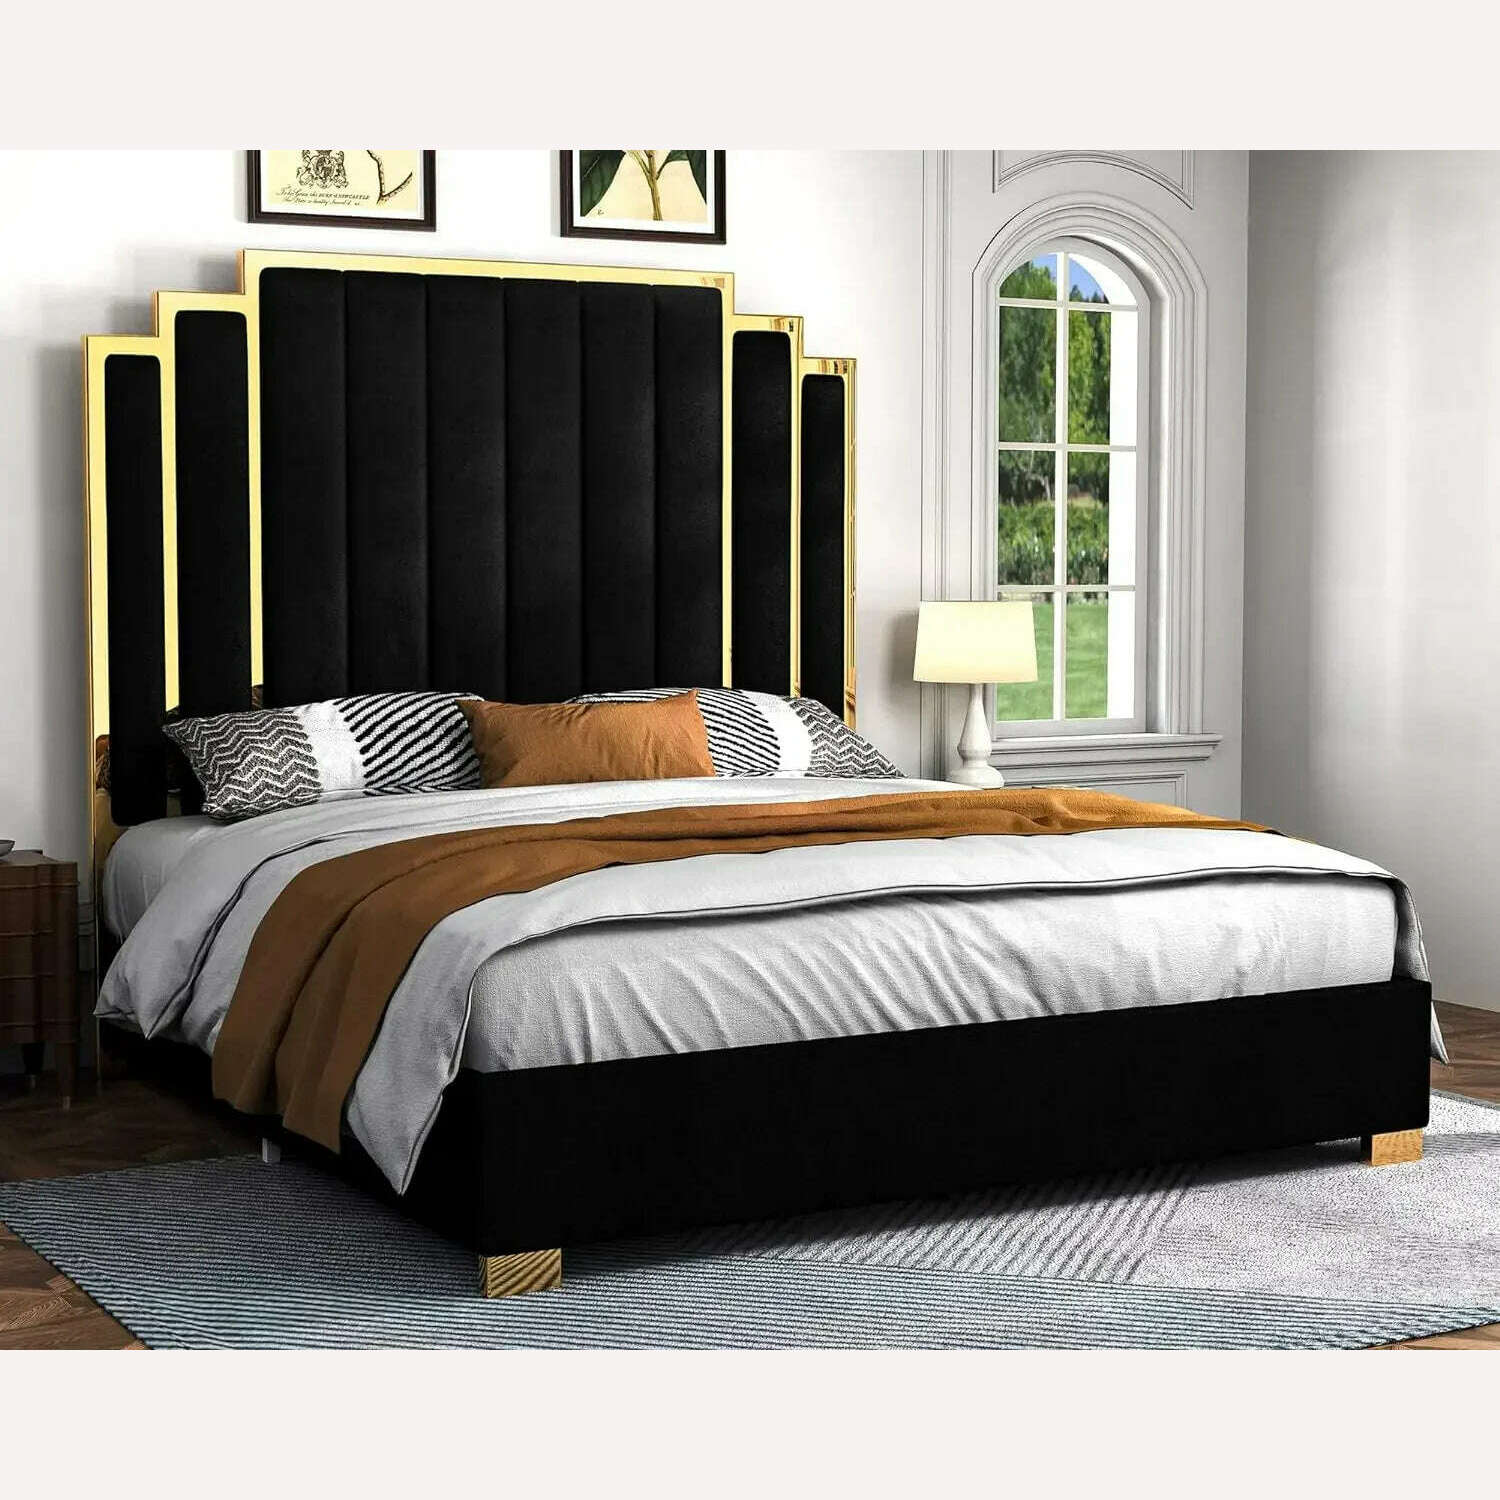 KIMLUD, Queen Size Bed Frame, 61.4" Velvet Upholstered Beds with Gold Trim Headboard/No Box Spring Needed, Queen Size Bed Frame, Black / United States / Queen, KIMLUD Womens Clothes